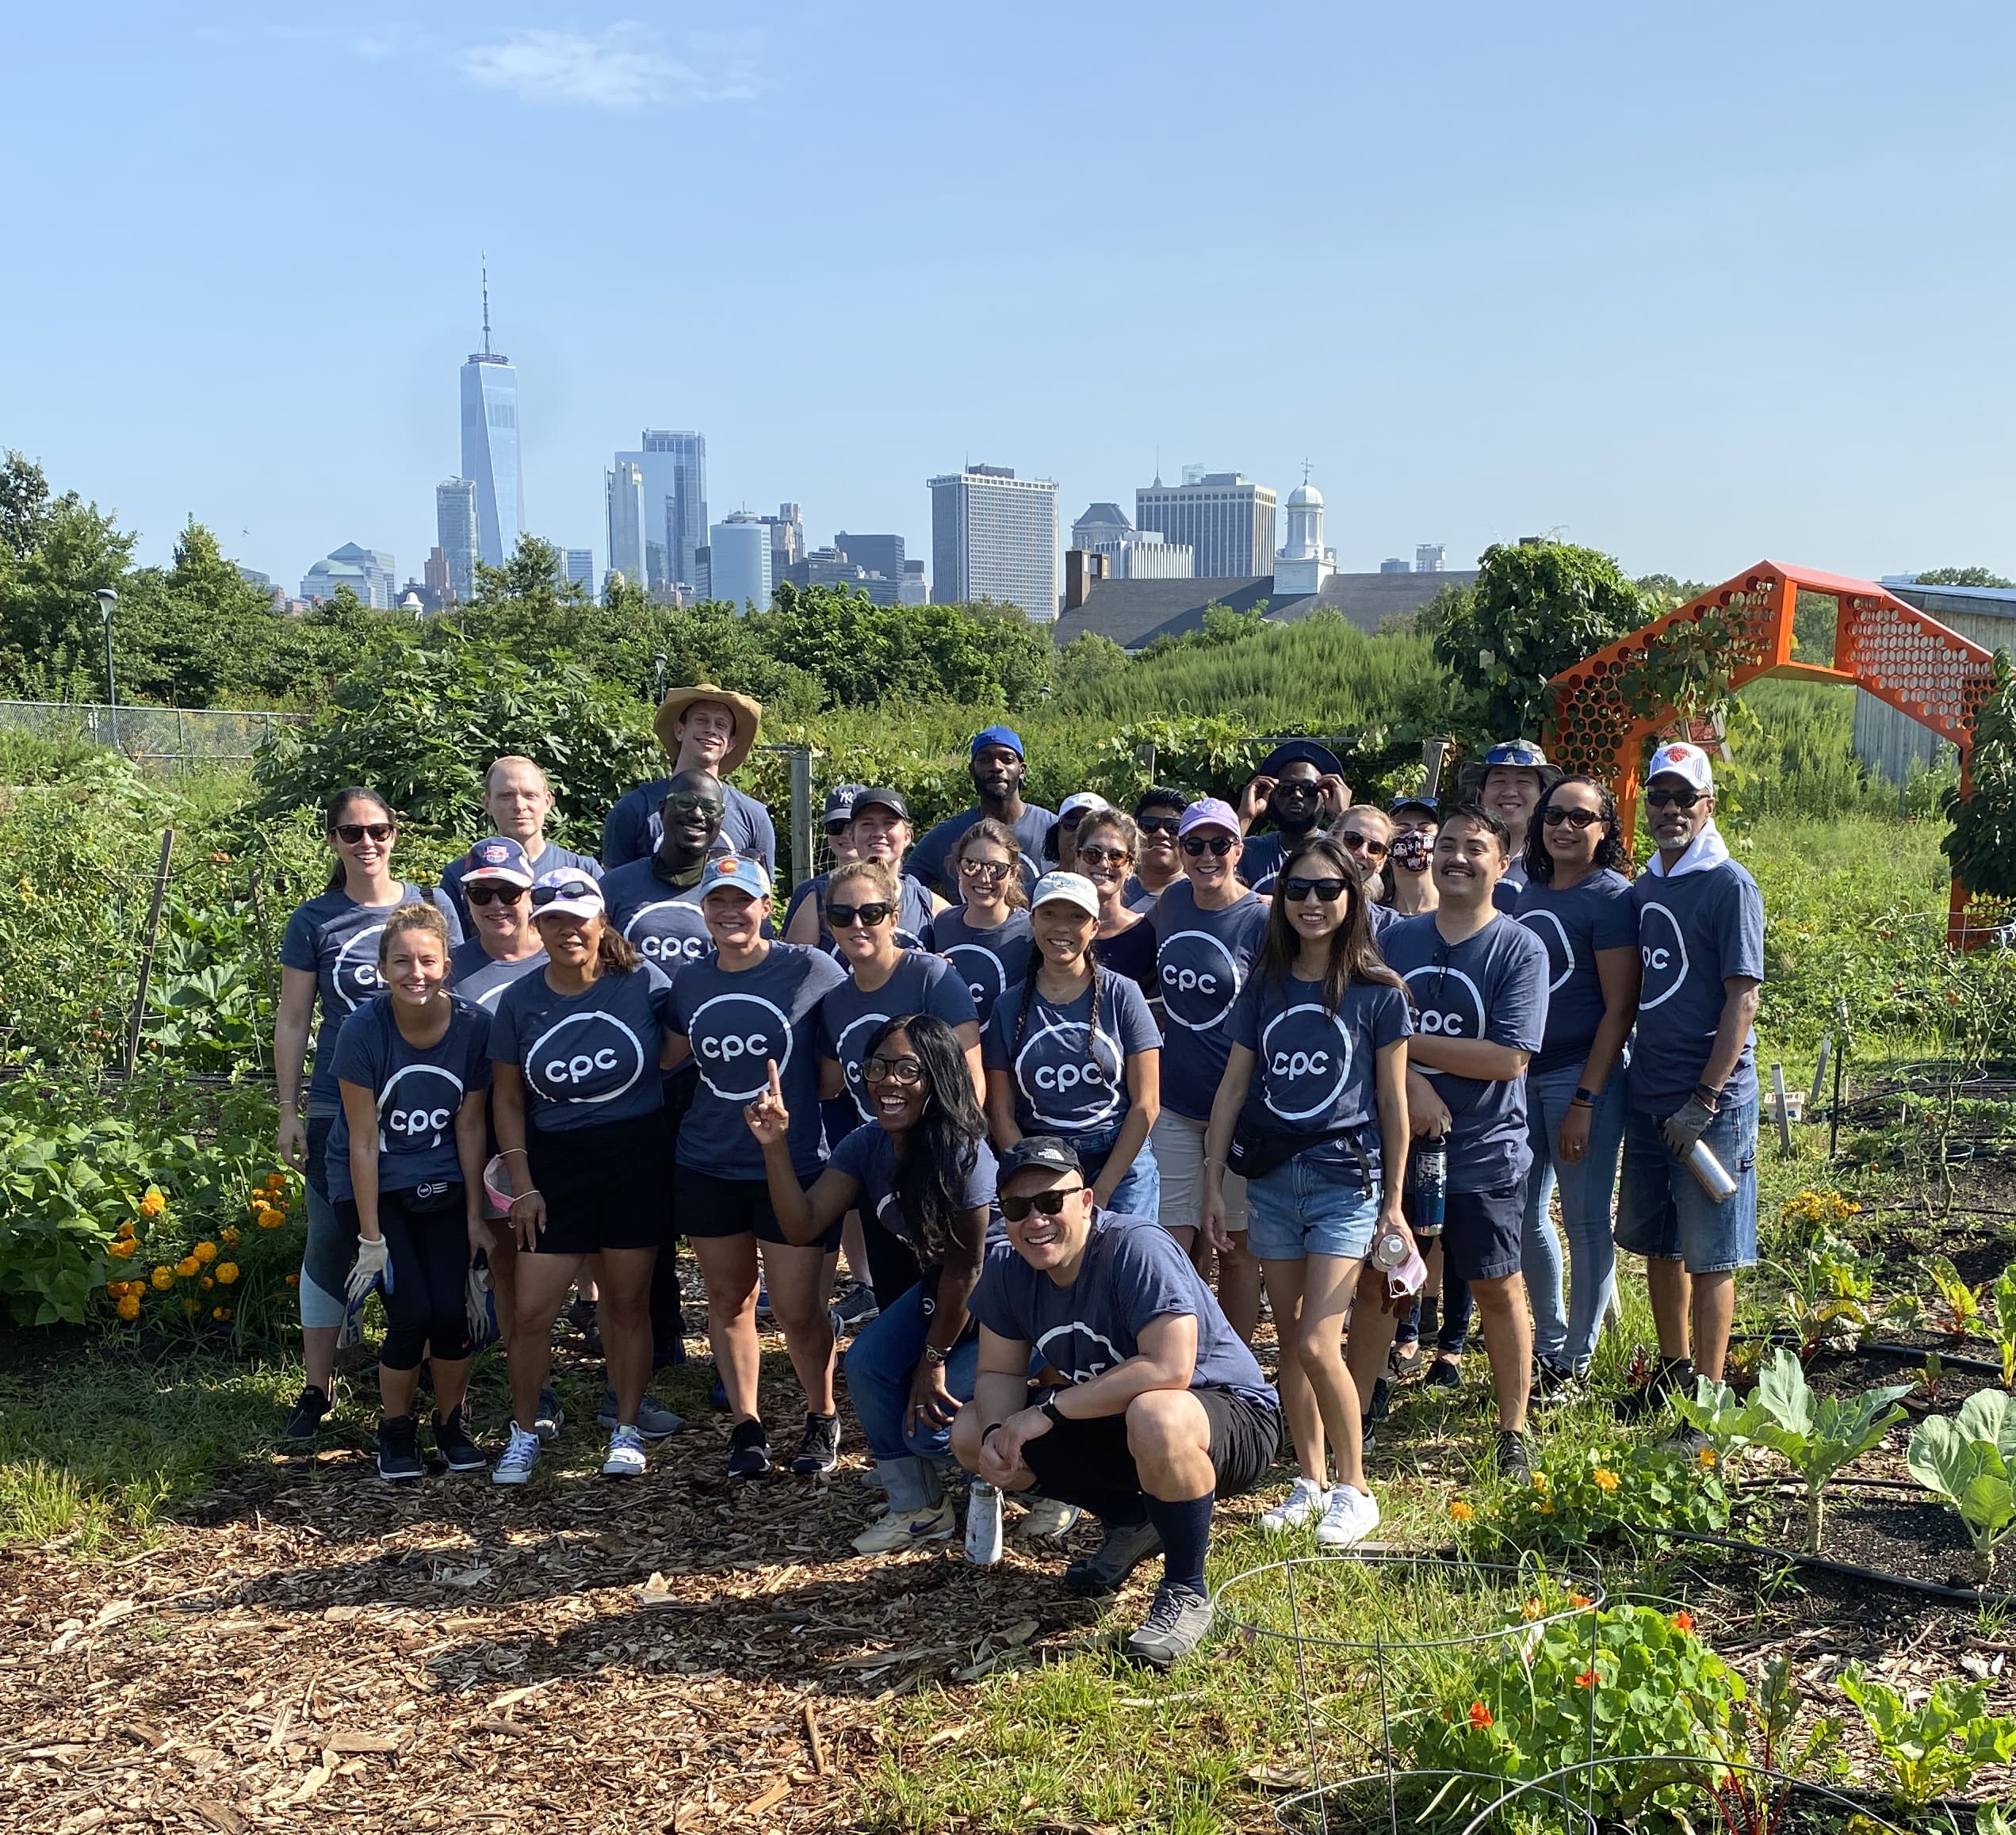 Group of people smile in urban farm wearing CPC shirts.